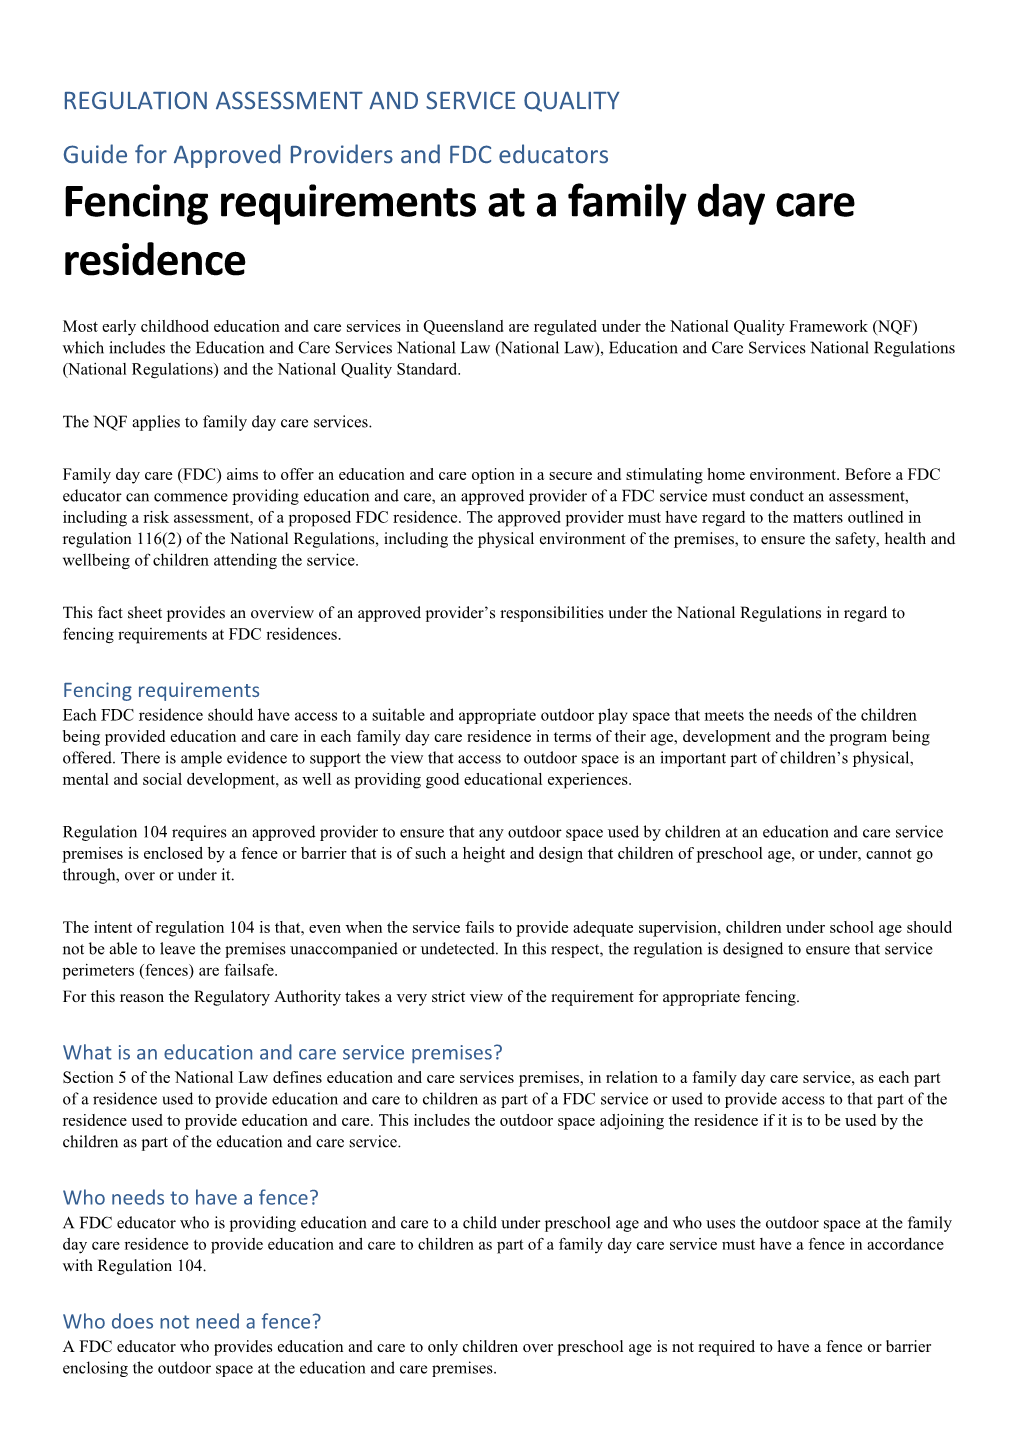 Fencing Arrangements for Family Day Care Residences Fact Sheet